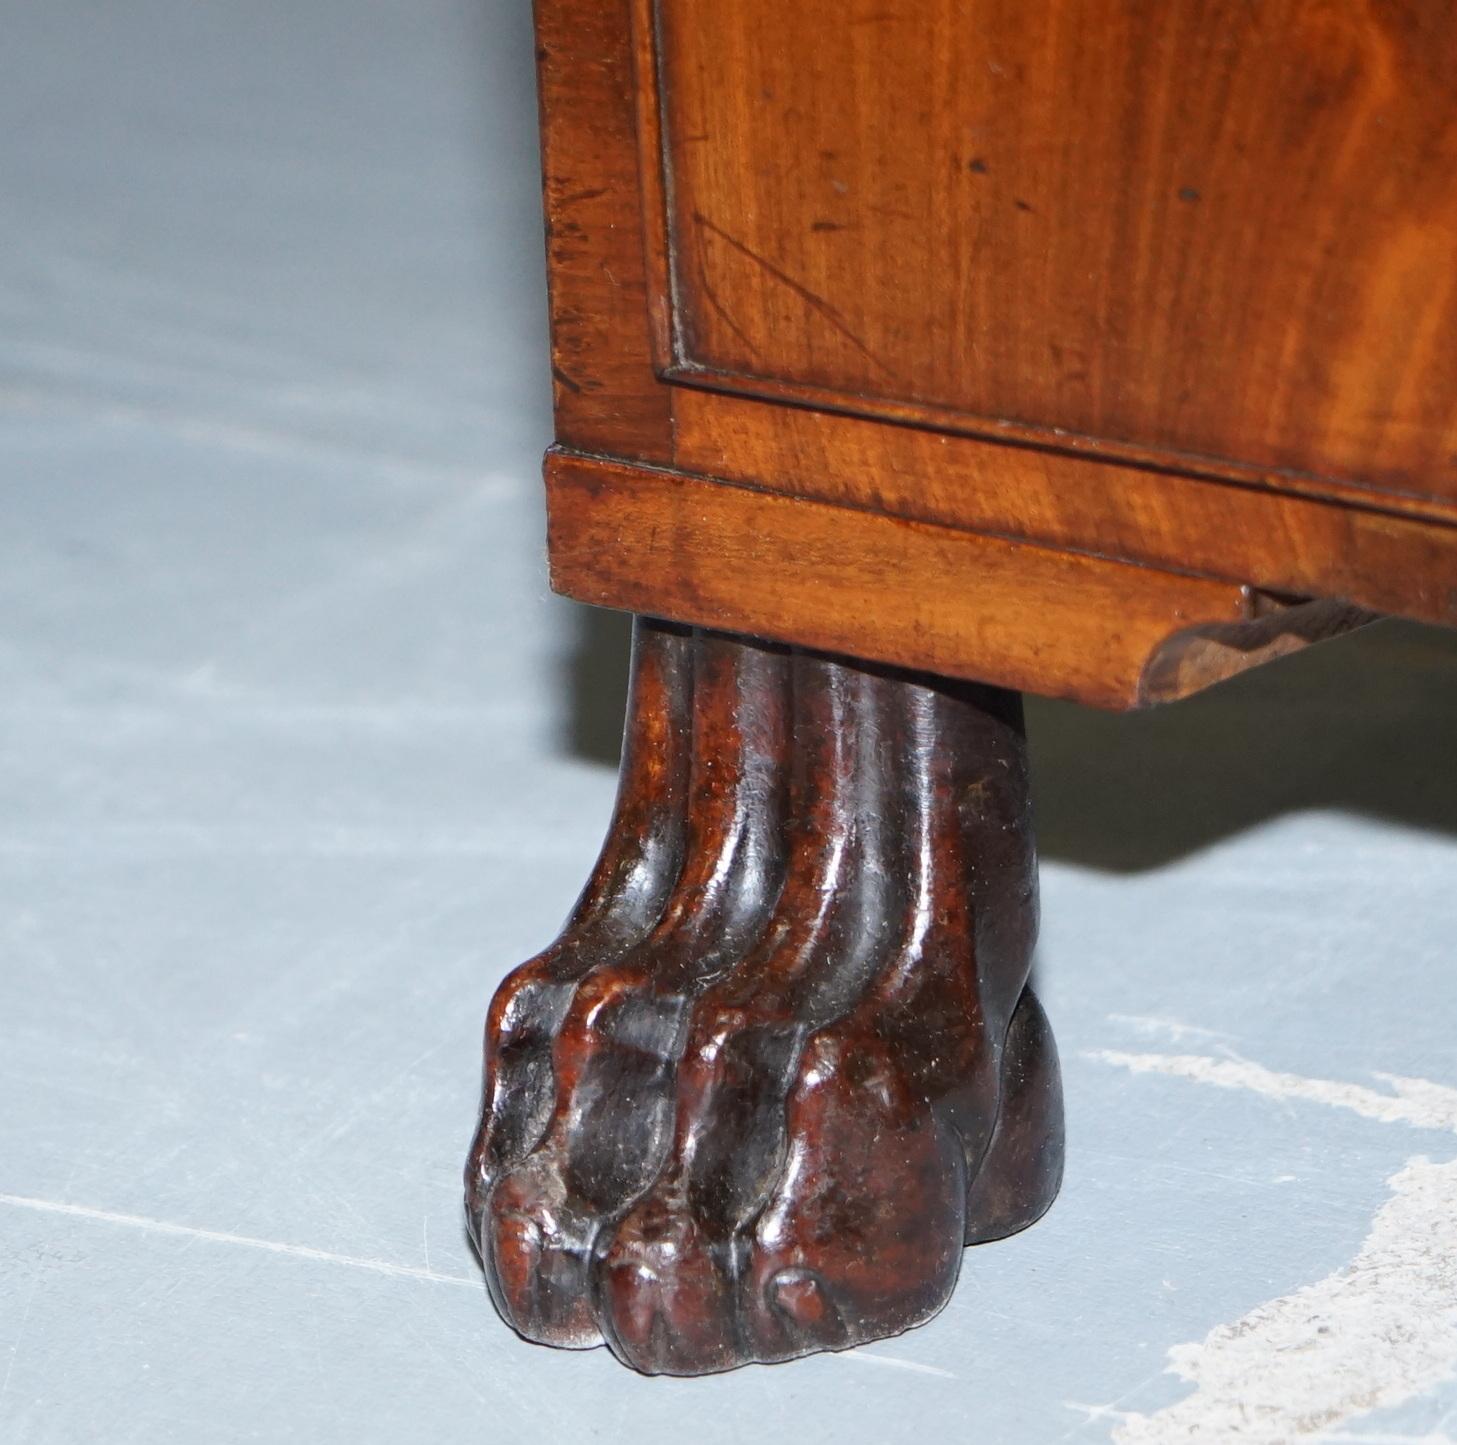 Exquisite Regency Period 1815 Hardwood Kneehole Desk with Lion Hairy Paw Feet For Sale 5